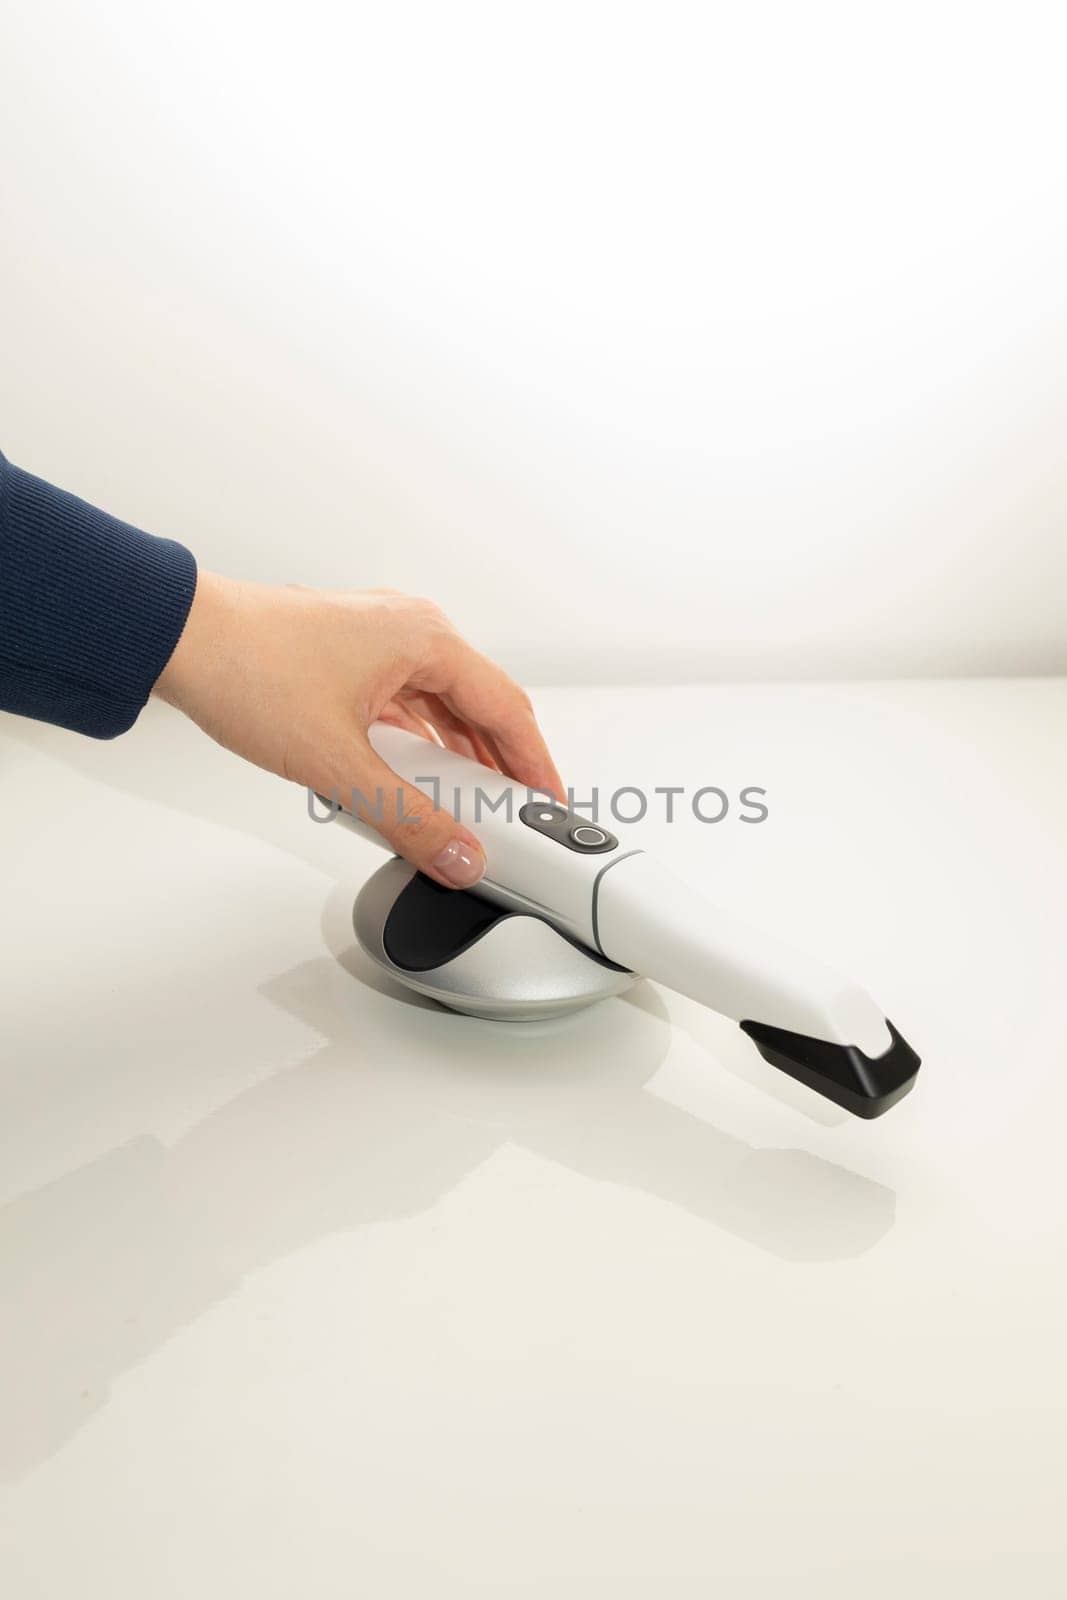 Doctor's Hand Holds 3D Intraoral Teeth Scanner For Imaging Tooth. Vertical Plane. Lab, Dental Equipment, Device, Dentistry. Copy Space by netatsi